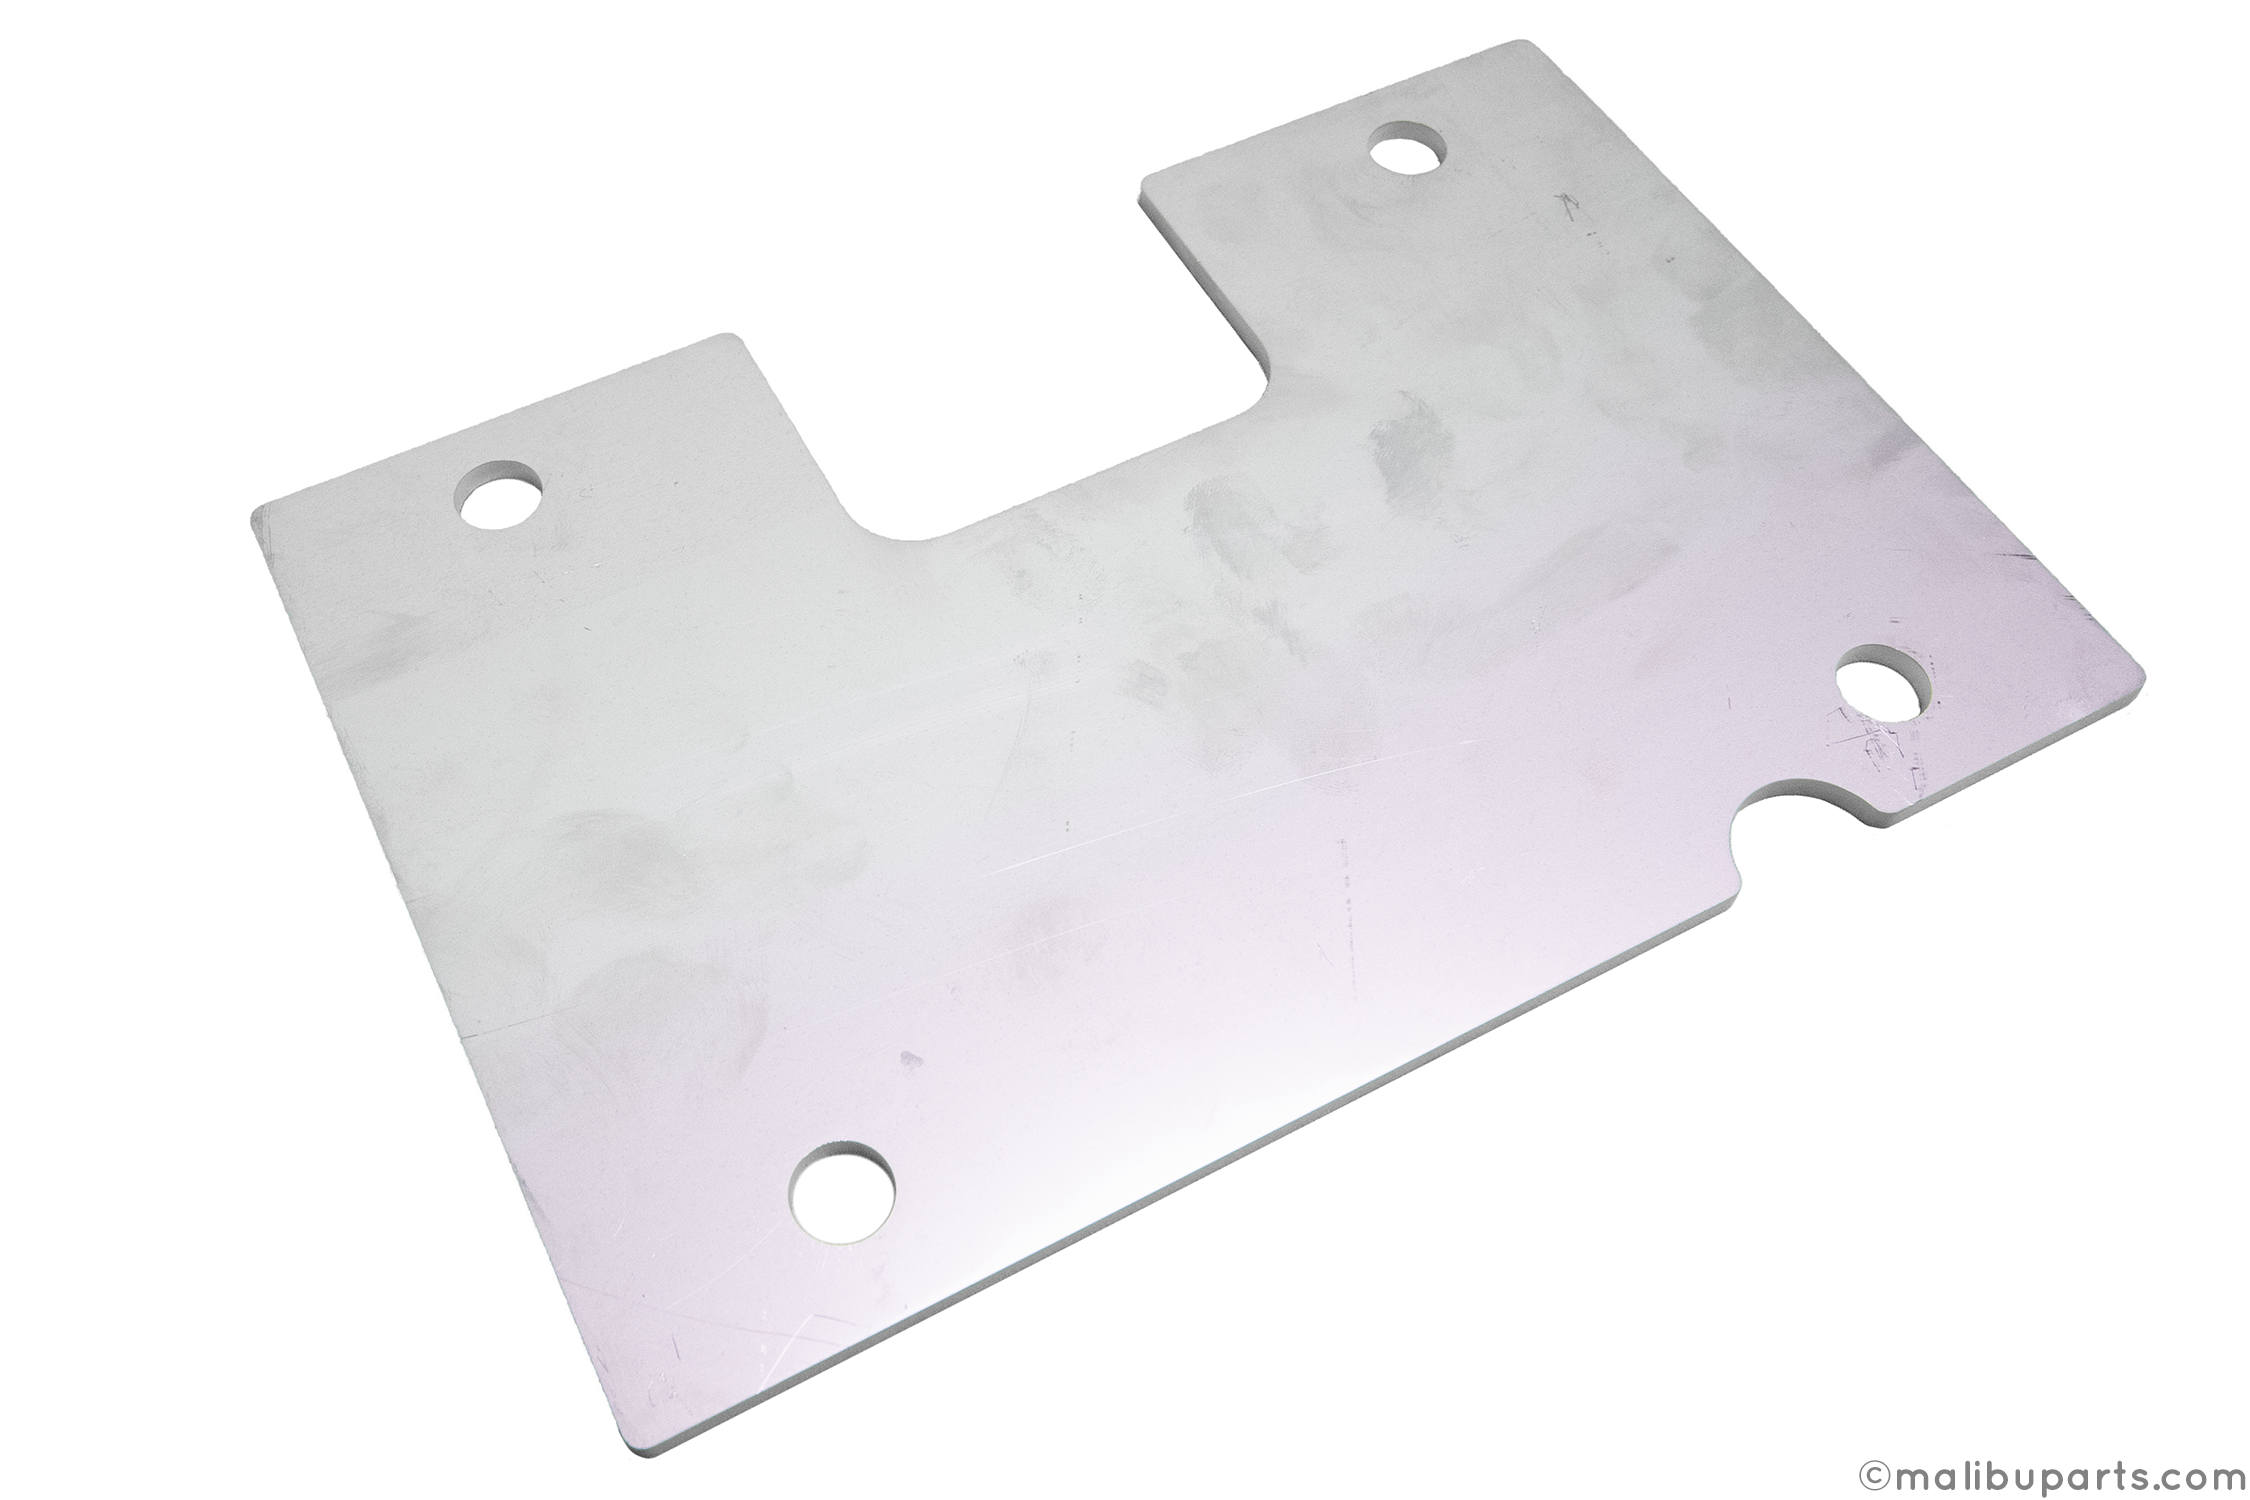 Malibu boats and Axis Boats Stainless Wedge Backing Plate